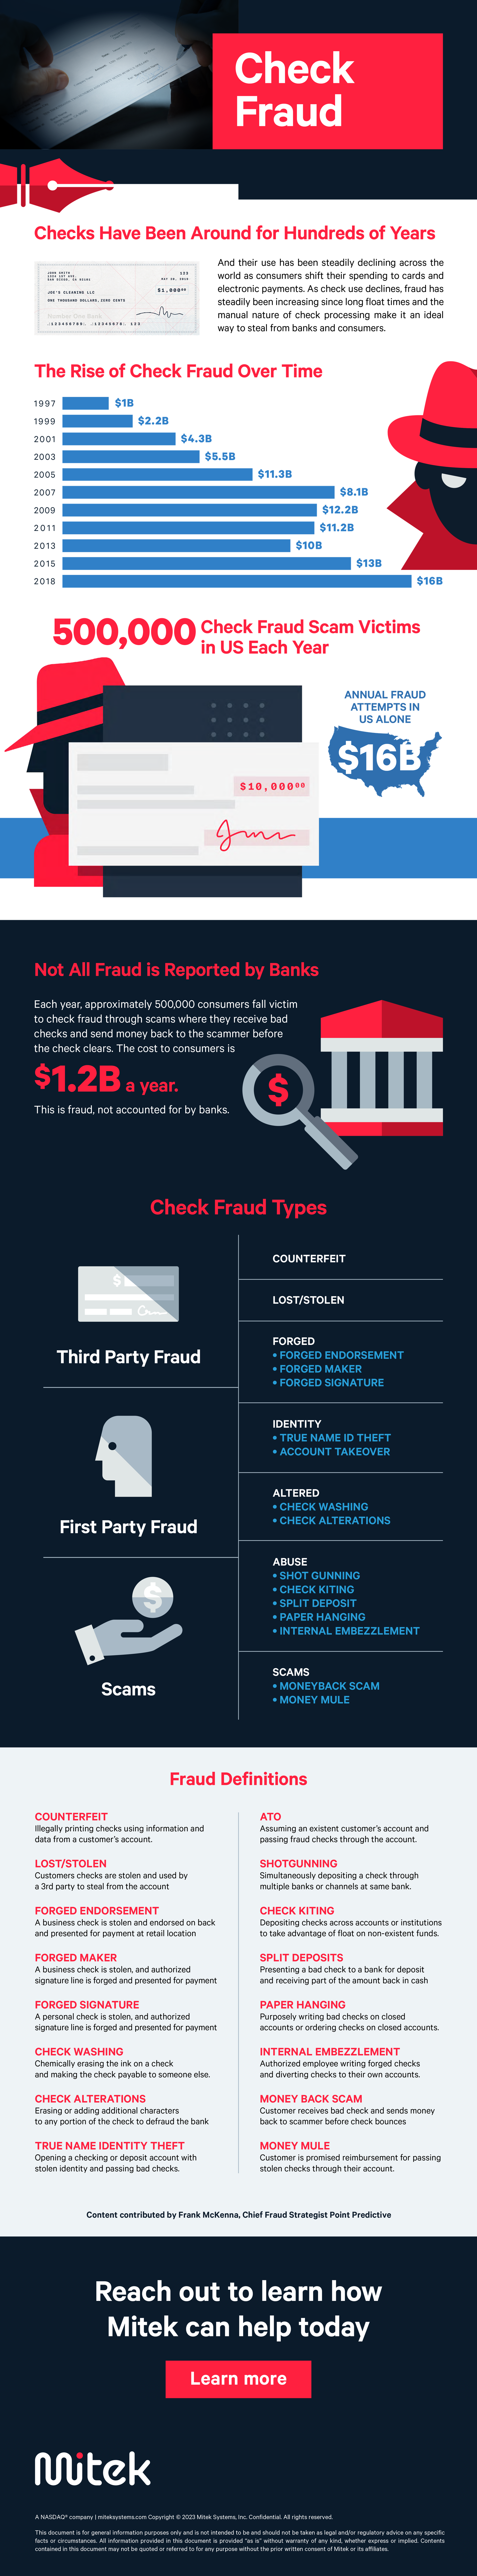 Check Fraud Infographic